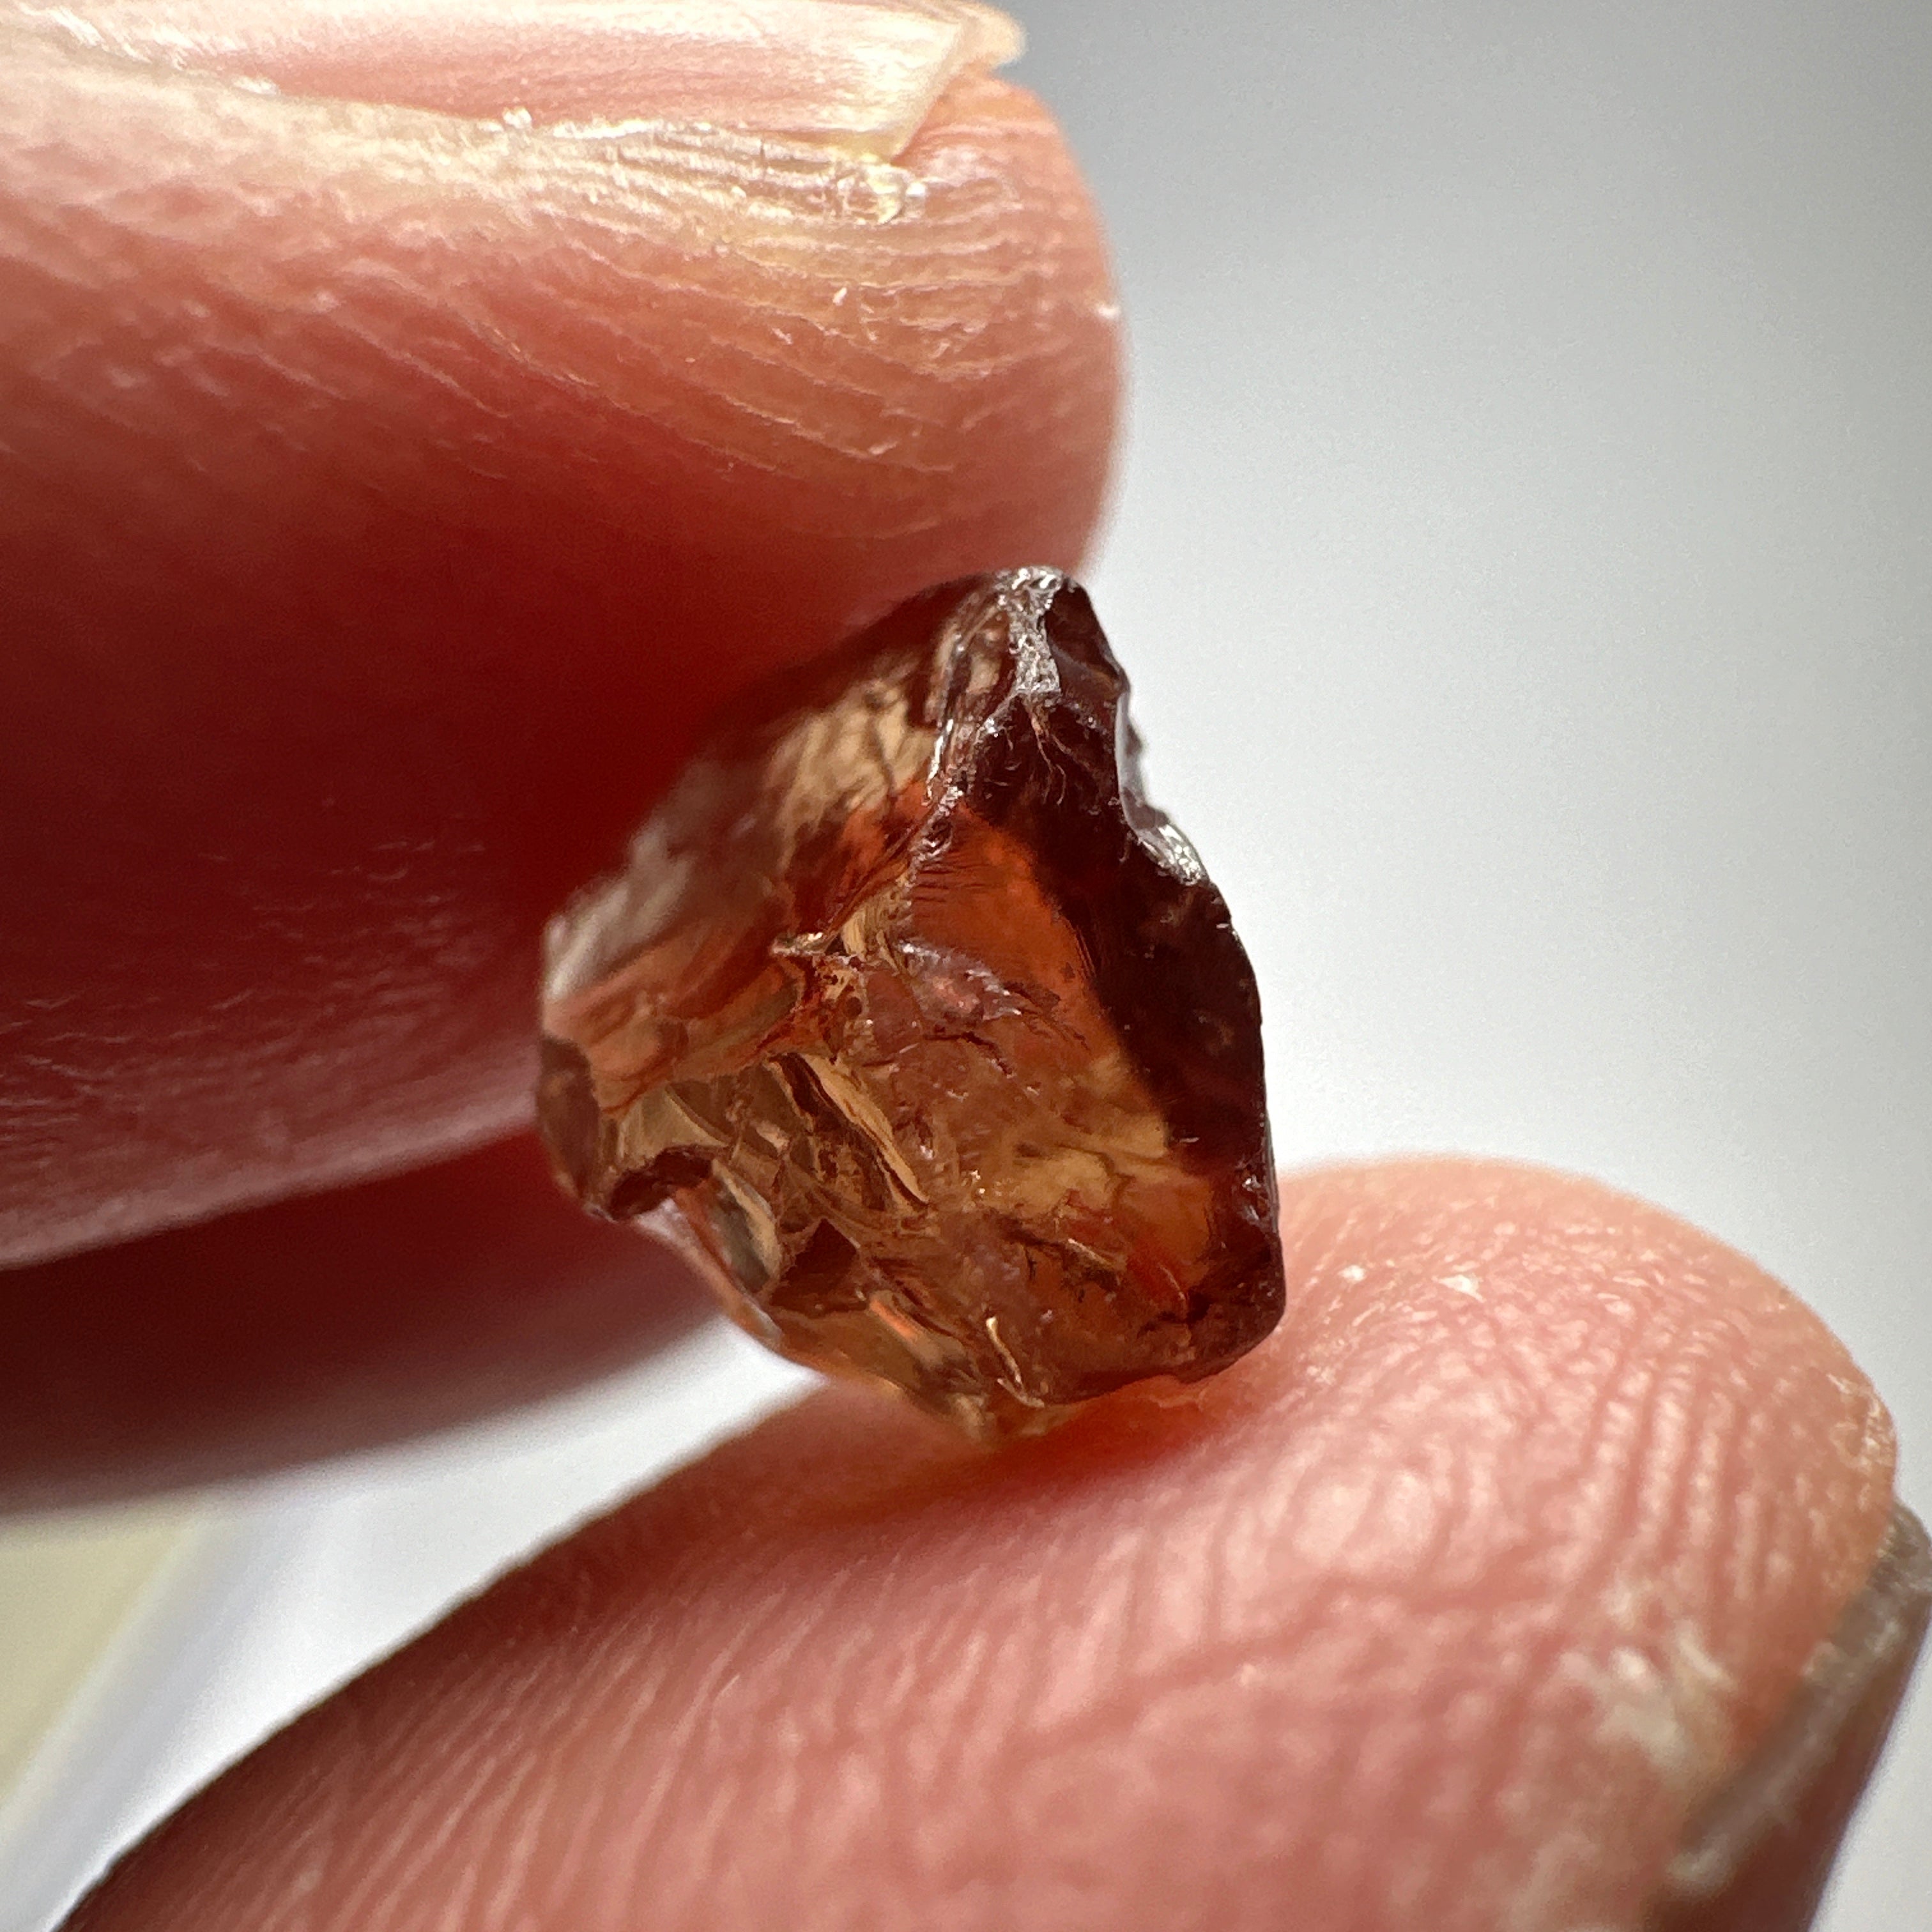 3.27ct Colour Change Garnet, Tanzania, Untreated Unheated, vvs-if with a slight inclusion on the skin on the outside